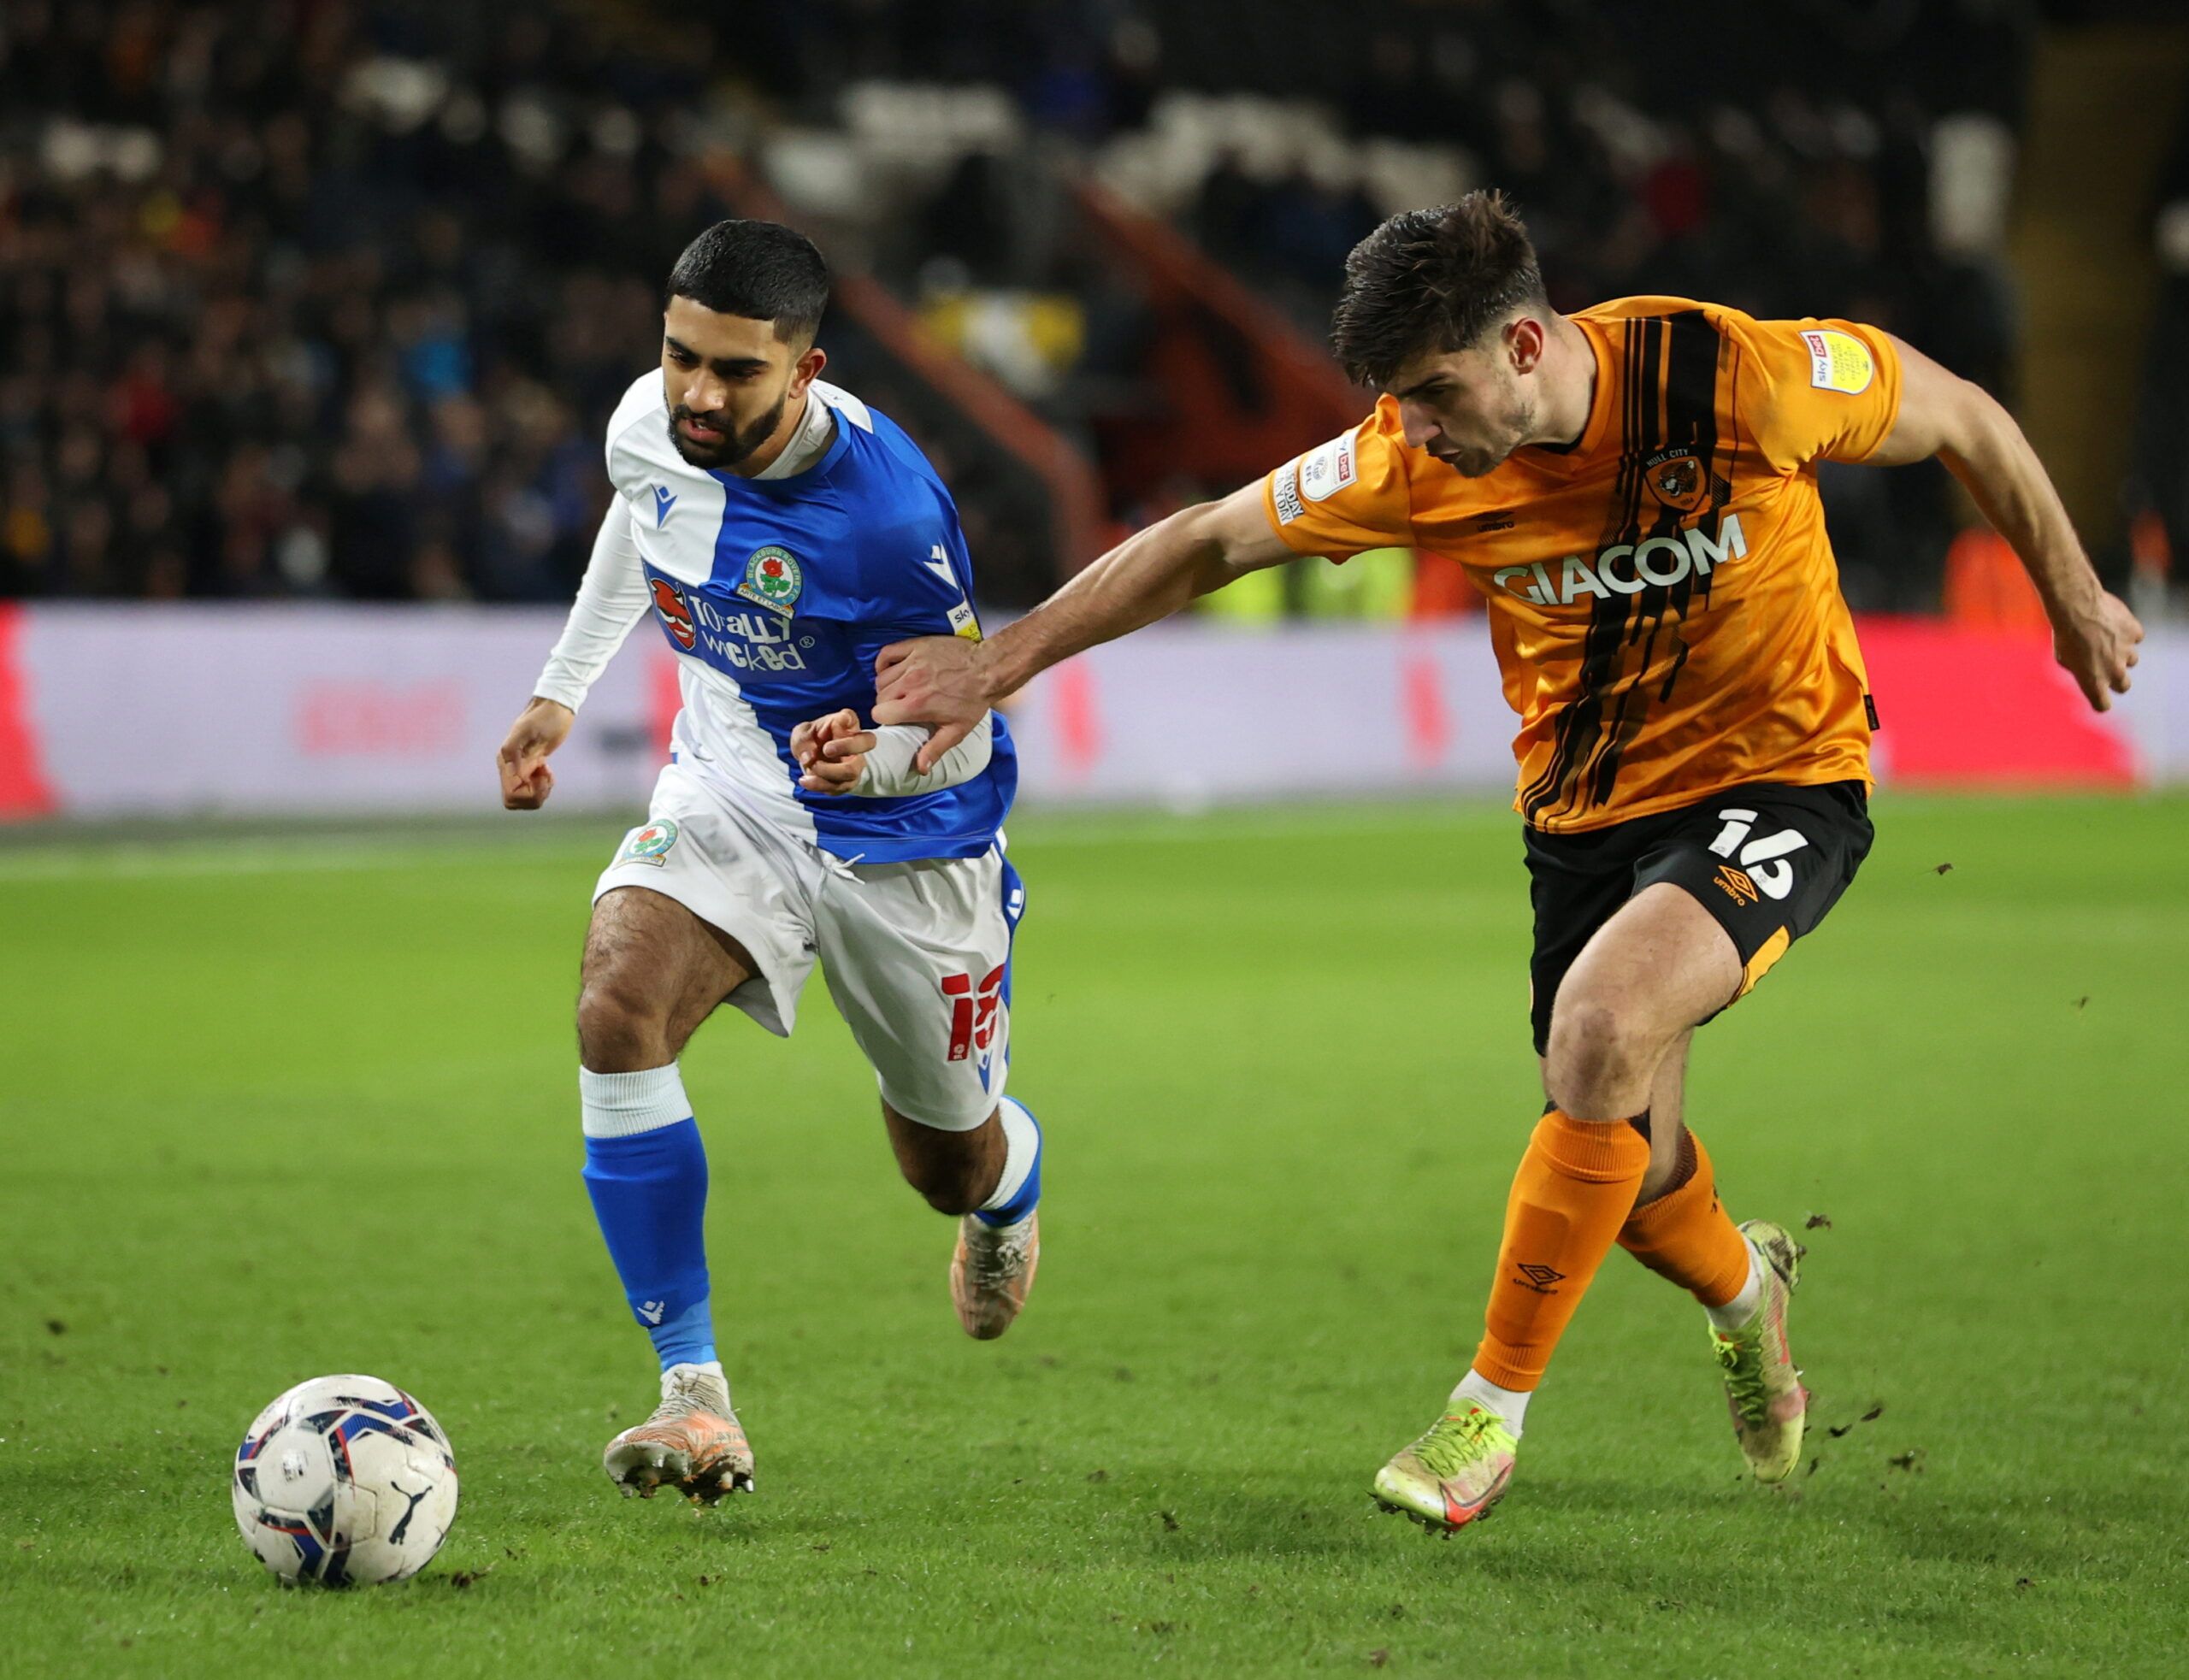 Soccer Football - Championship - Hull City v Blackburn Rovers - KCOM Stadium, Hull, Britain - January 19, 2022  Blackburn Rovers' Dilan Markanday in action with Hull City's Ryan Longman  Action Images/Molly Darlington  EDITORIAL USE ONLY. No use with unauthorized audio, video, data, fixture lists, club/league logos or 